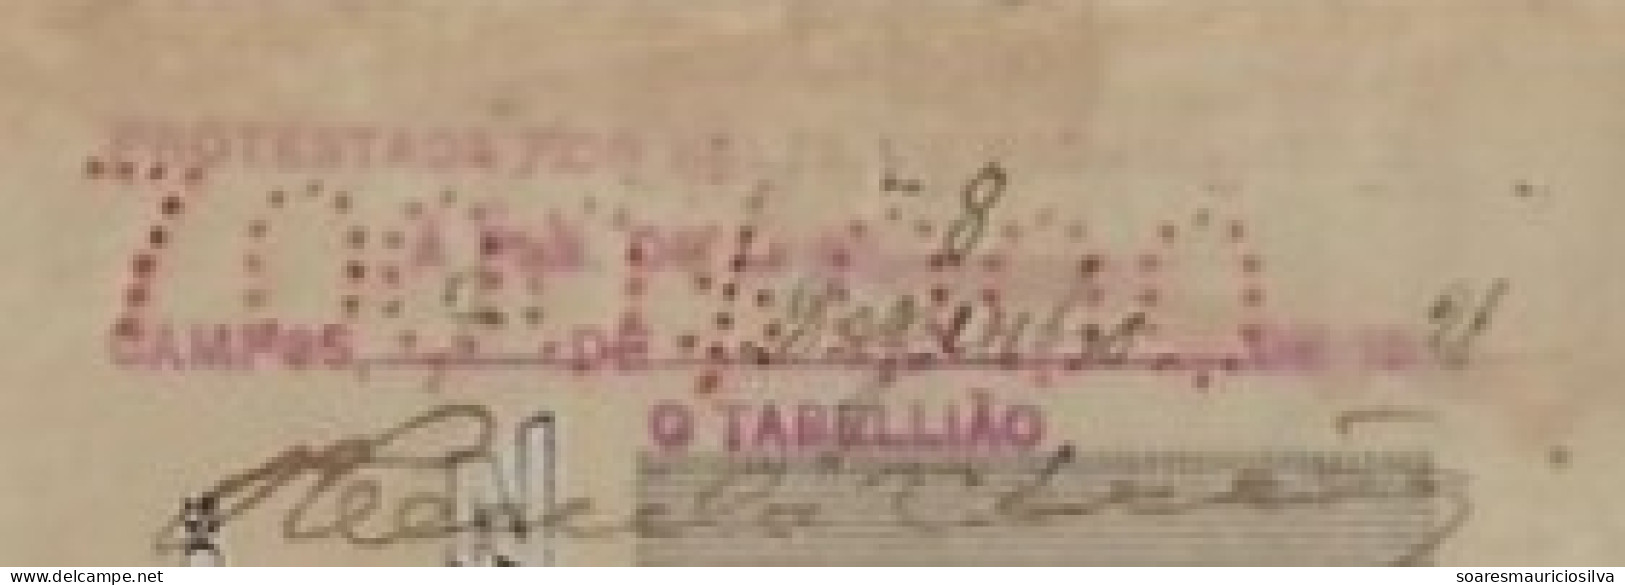 Brazil 1920 Promissory Note Issued Campos National Treasury +State Of Rio De Janeiro Tax Stamp Protest Cancel Perforated - Briefe U. Dokumente